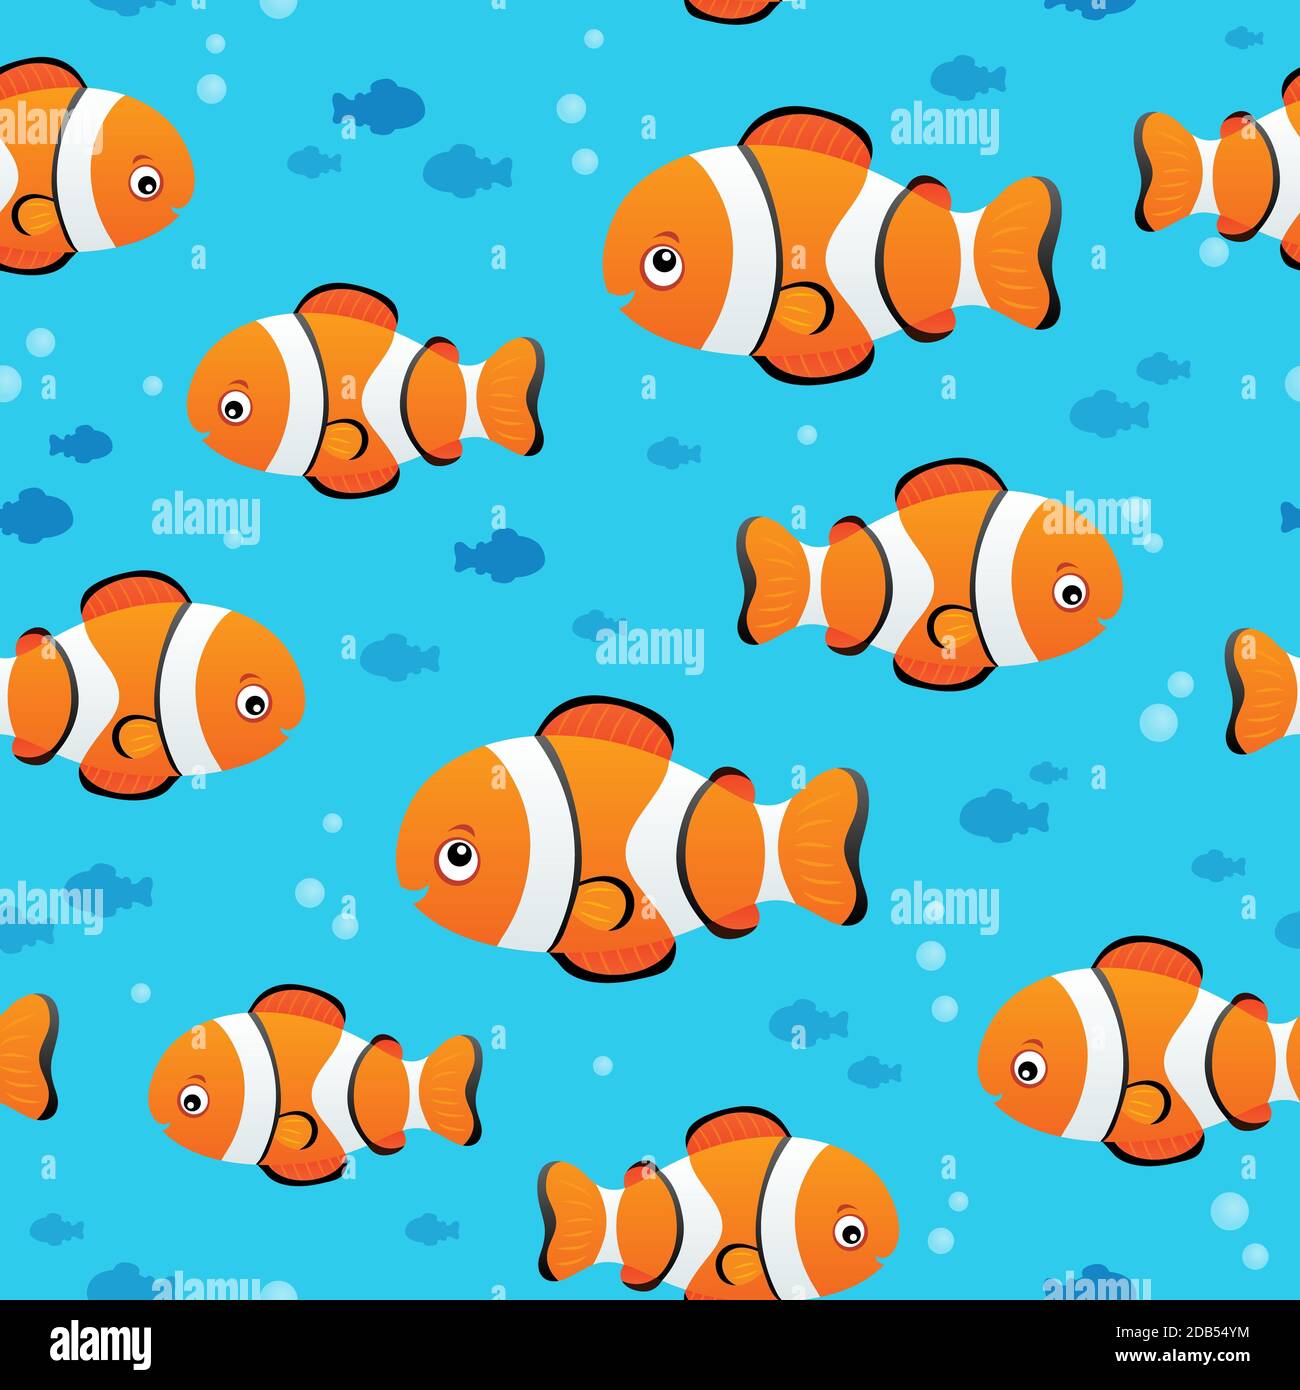 Seamless background stylized fishes 7 - picture illustration. Stock Photo